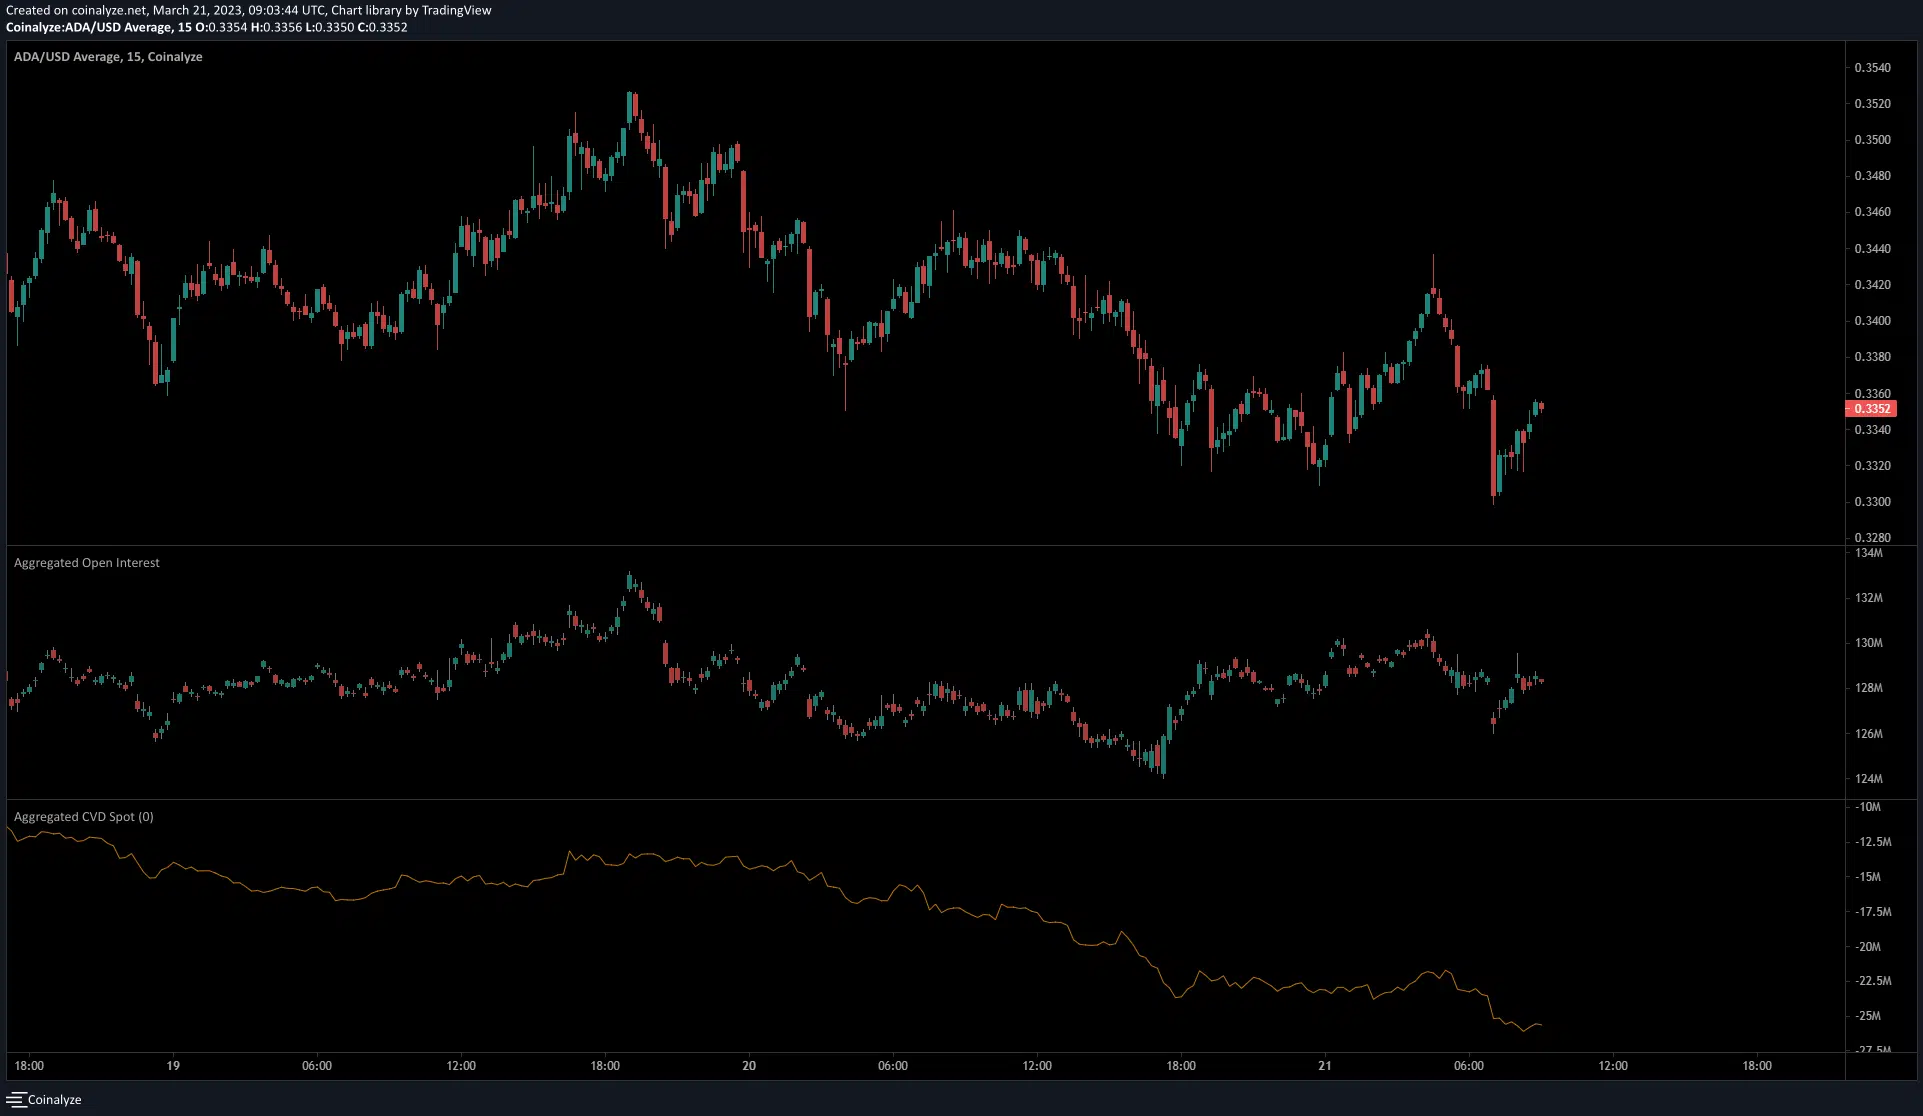 Cardano shows a likelihood of a downward breakout after a compression